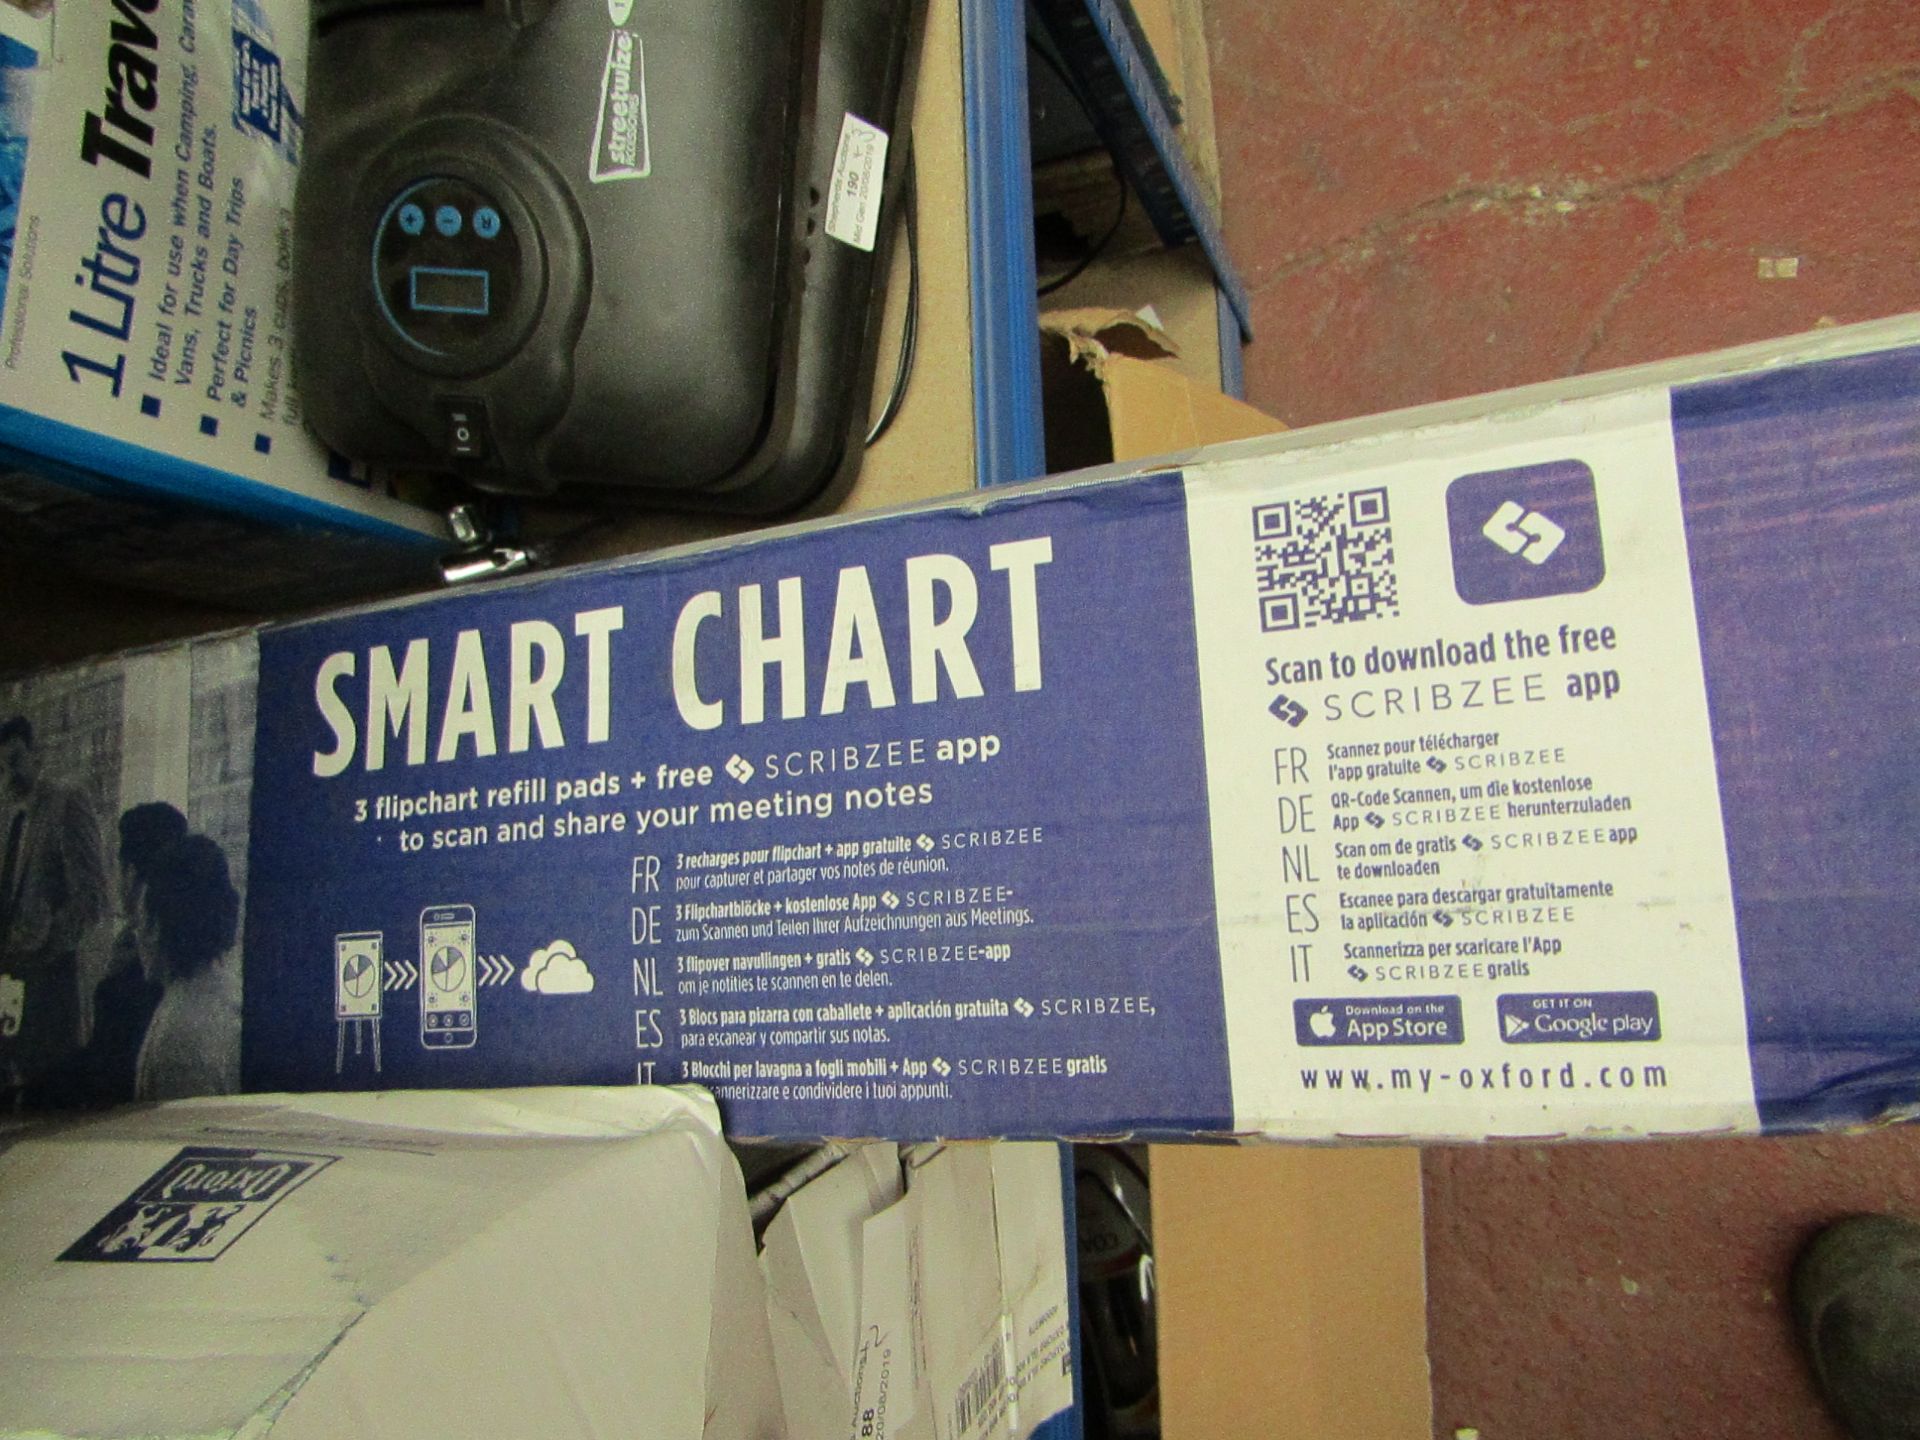 2 x Smart Chart 3 Refill Pads allows you to scan & share you meetings notes new & boxed